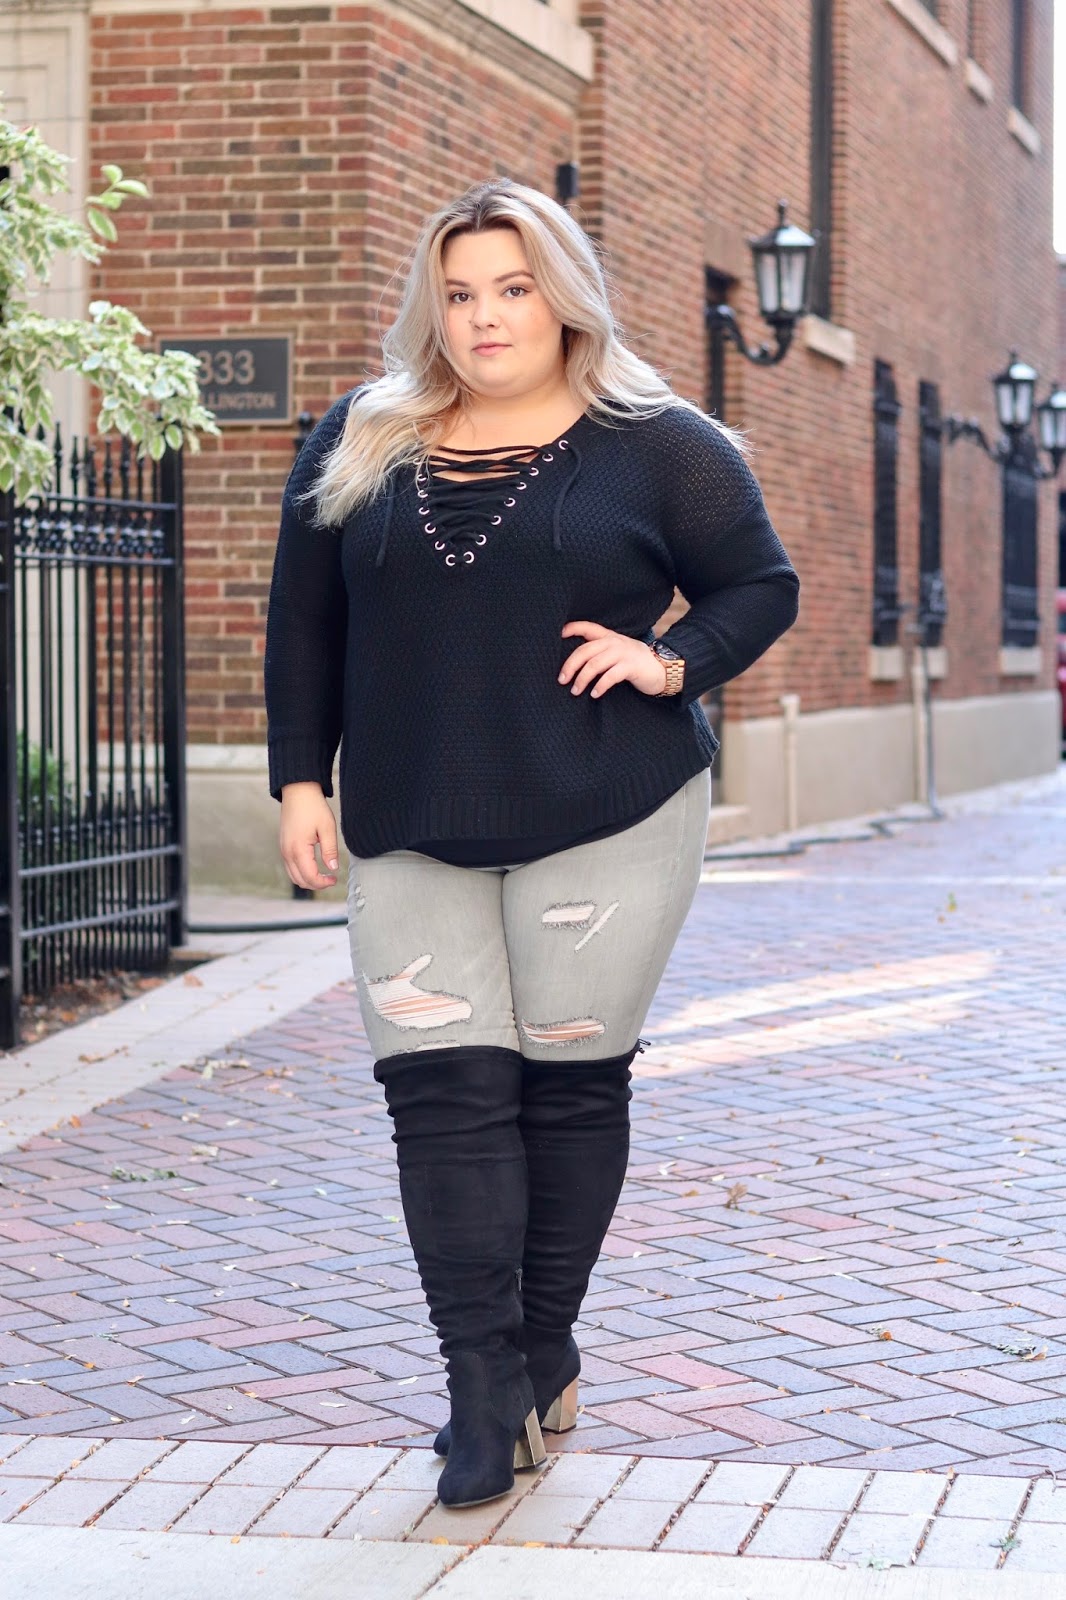 plus size wide calf over the knee boots, over-the-knee boots, wide calf boots, wide calf, cheap wide calf boots, over the knee boots, wide fit, Natalie in the city, Natalie Craig, Chicago fashion blogger, plus size Chicago fashion blogger, midwest fashion blogger, curves and confidence, Charlotte Russe, plus size fashion, fatshion, affordable plus size clothes